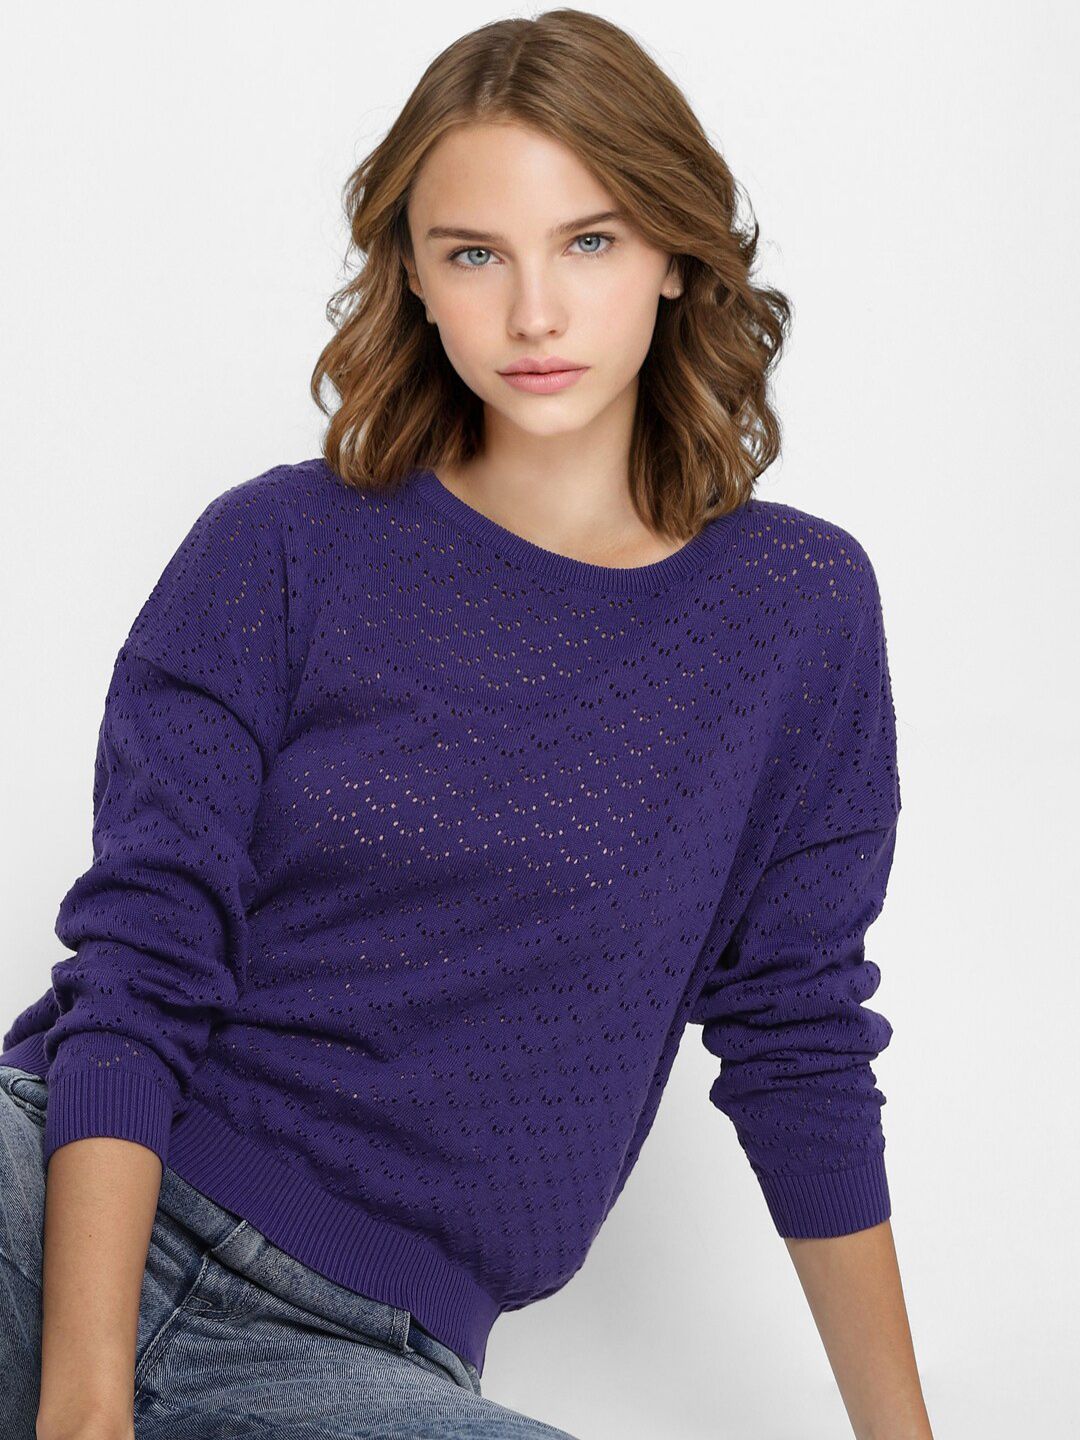 ONLY Women Purple Self Designed Pullover Sweater Price in India